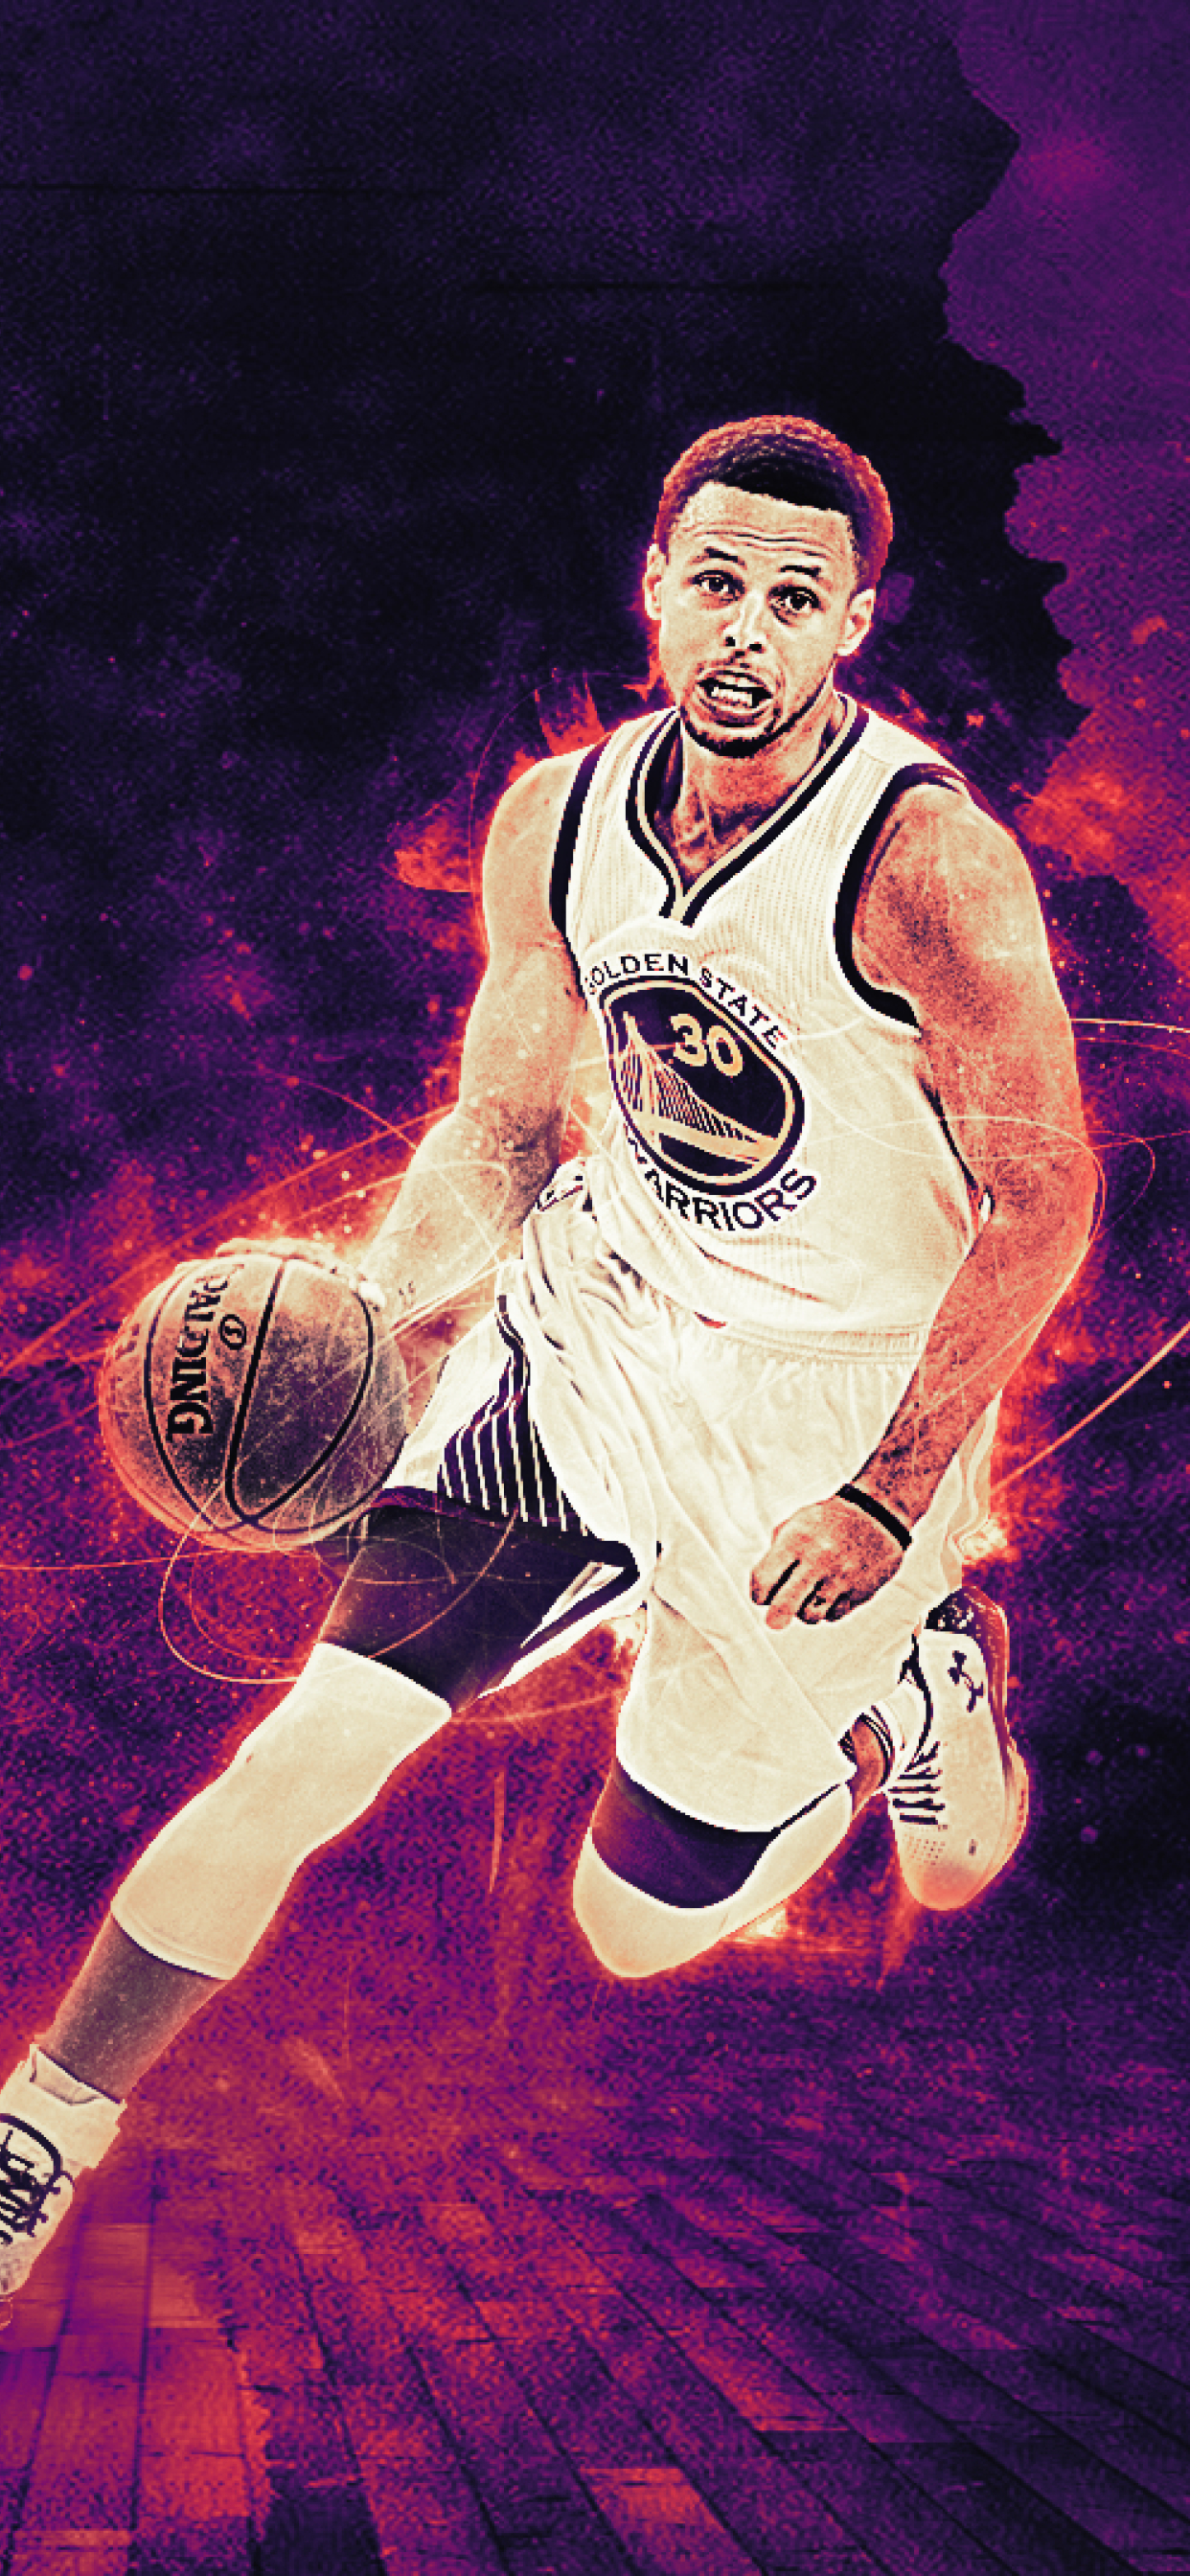 Stephen curry wallpaper Nba stephen curry Stephen curry